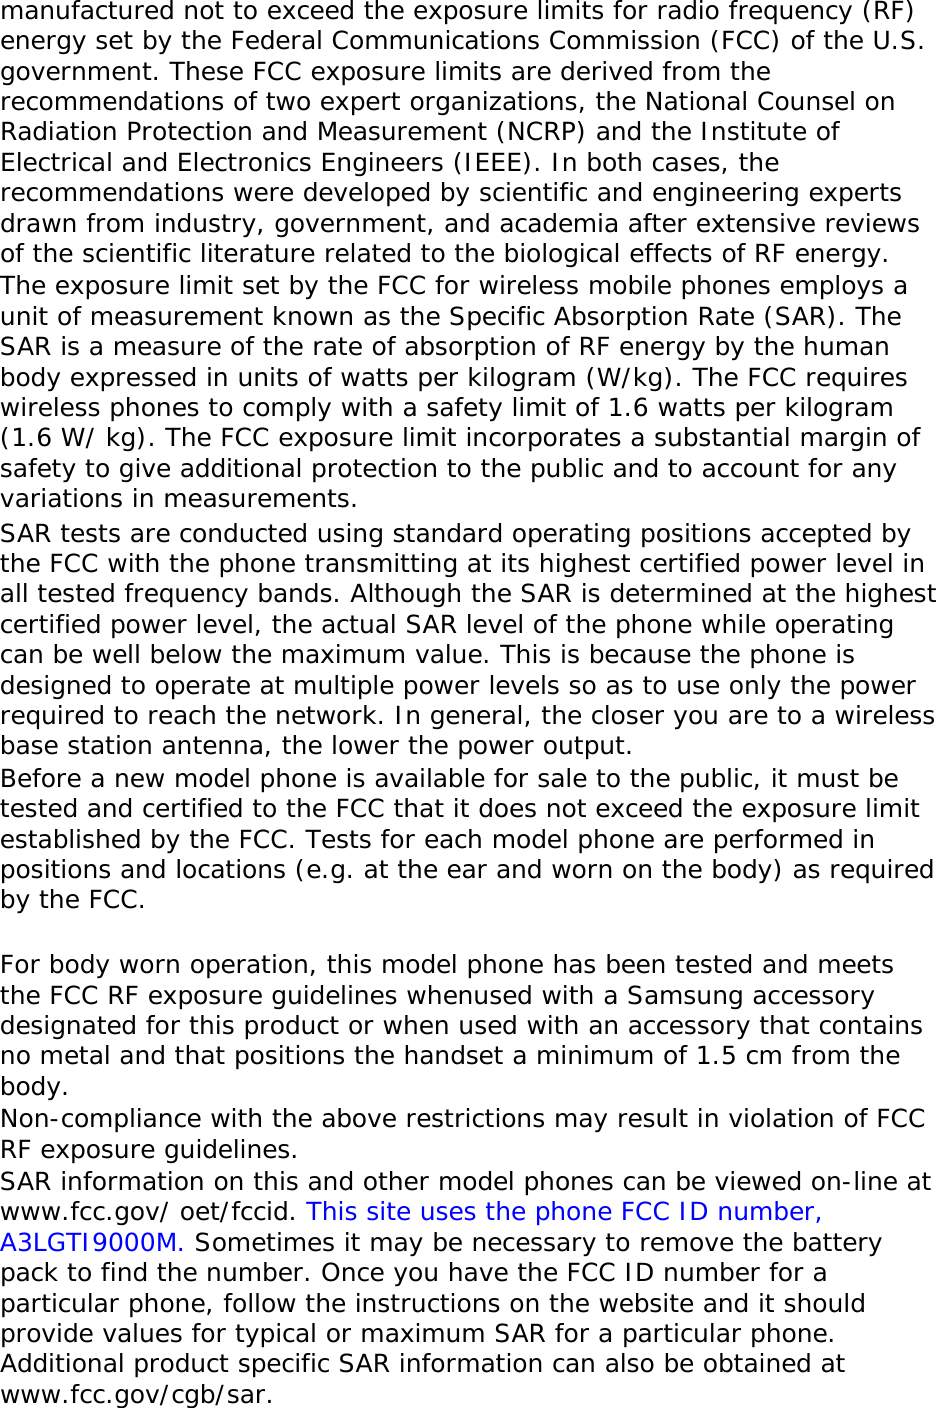 manufactured not to exceed the exposure limits for radio frequency (RF) energy set by the Federal Communications Commission (FCC) of the U.S. government. These FCC exposure limits are derived from the recommendations of two expert organizations, the National Counsel on Radiation Protection and Measurement (NCRP) and the Institute of Electrical and Electronics Engineers (IEEE). In both cases, the recommendations were developed by scientific and engineering experts drawn from industry, government, and academia after extensive reviews of the scientific literature related to the biological effects of RF energy. The exposure limit set by the FCC for wireless mobile phones employs a unit of measurement known as the Specific Absorption Rate (SAR). The SAR is a measure of the rate of absorption of RF energy by the human body expressed in units of watts per kilogram (W/kg). The FCC requires wireless phones to comply with a safety limit of 1.6 watts per kilogram (1.6 W/ kg). The FCC exposure limit incorporates a substantial margin of safety to give additional protection to the public and to account for any variations in measurements. SAR tests are conducted using standard operating positions accepted by the FCC with the phone transmitting at its highest certified power level in all tested frequency bands. Although the SAR is determined at the highest certified power level, the actual SAR level of the phone while operating can be well below the maximum value. This is because the phone is designed to operate at multiple power levels so as to use only the power required to reach the network. In general, the closer you are to a wireless base station antenna, the lower the power output. Before a new model phone is available for sale to the public, it must be tested and certified to the FCC that it does not exceed the exposure limit established by the FCC. Tests for each model phone are performed in positions and locations (e.g. at the ear and worn on the body) as required by the FCC.    For body worn operation, this model phone has been tested and meets the FCC RF exposure guidelines whenused with a Samsung accessory designated for this product or when used with an accessory that contains no metal and that positions the handset a minimum of 1.5 cm from the body.  Non-compliance with the above restrictions may result in violation of FCC RF exposure guidelines. SAR information on this and other model phones can be viewed on-line at www.fcc.gov/ oet/fccid. This site uses the phone FCC ID number, A3LGTI9000M. Sometimes it may be necessary to remove the battery pack to find the number. Once you have the FCC ID number for a particular phone, follow the instructions on the website and it should provide values for typical or maximum SAR for a particular phone. Additional product specific SAR information can also be obtained at www.fcc.gov/cgb/sar. 